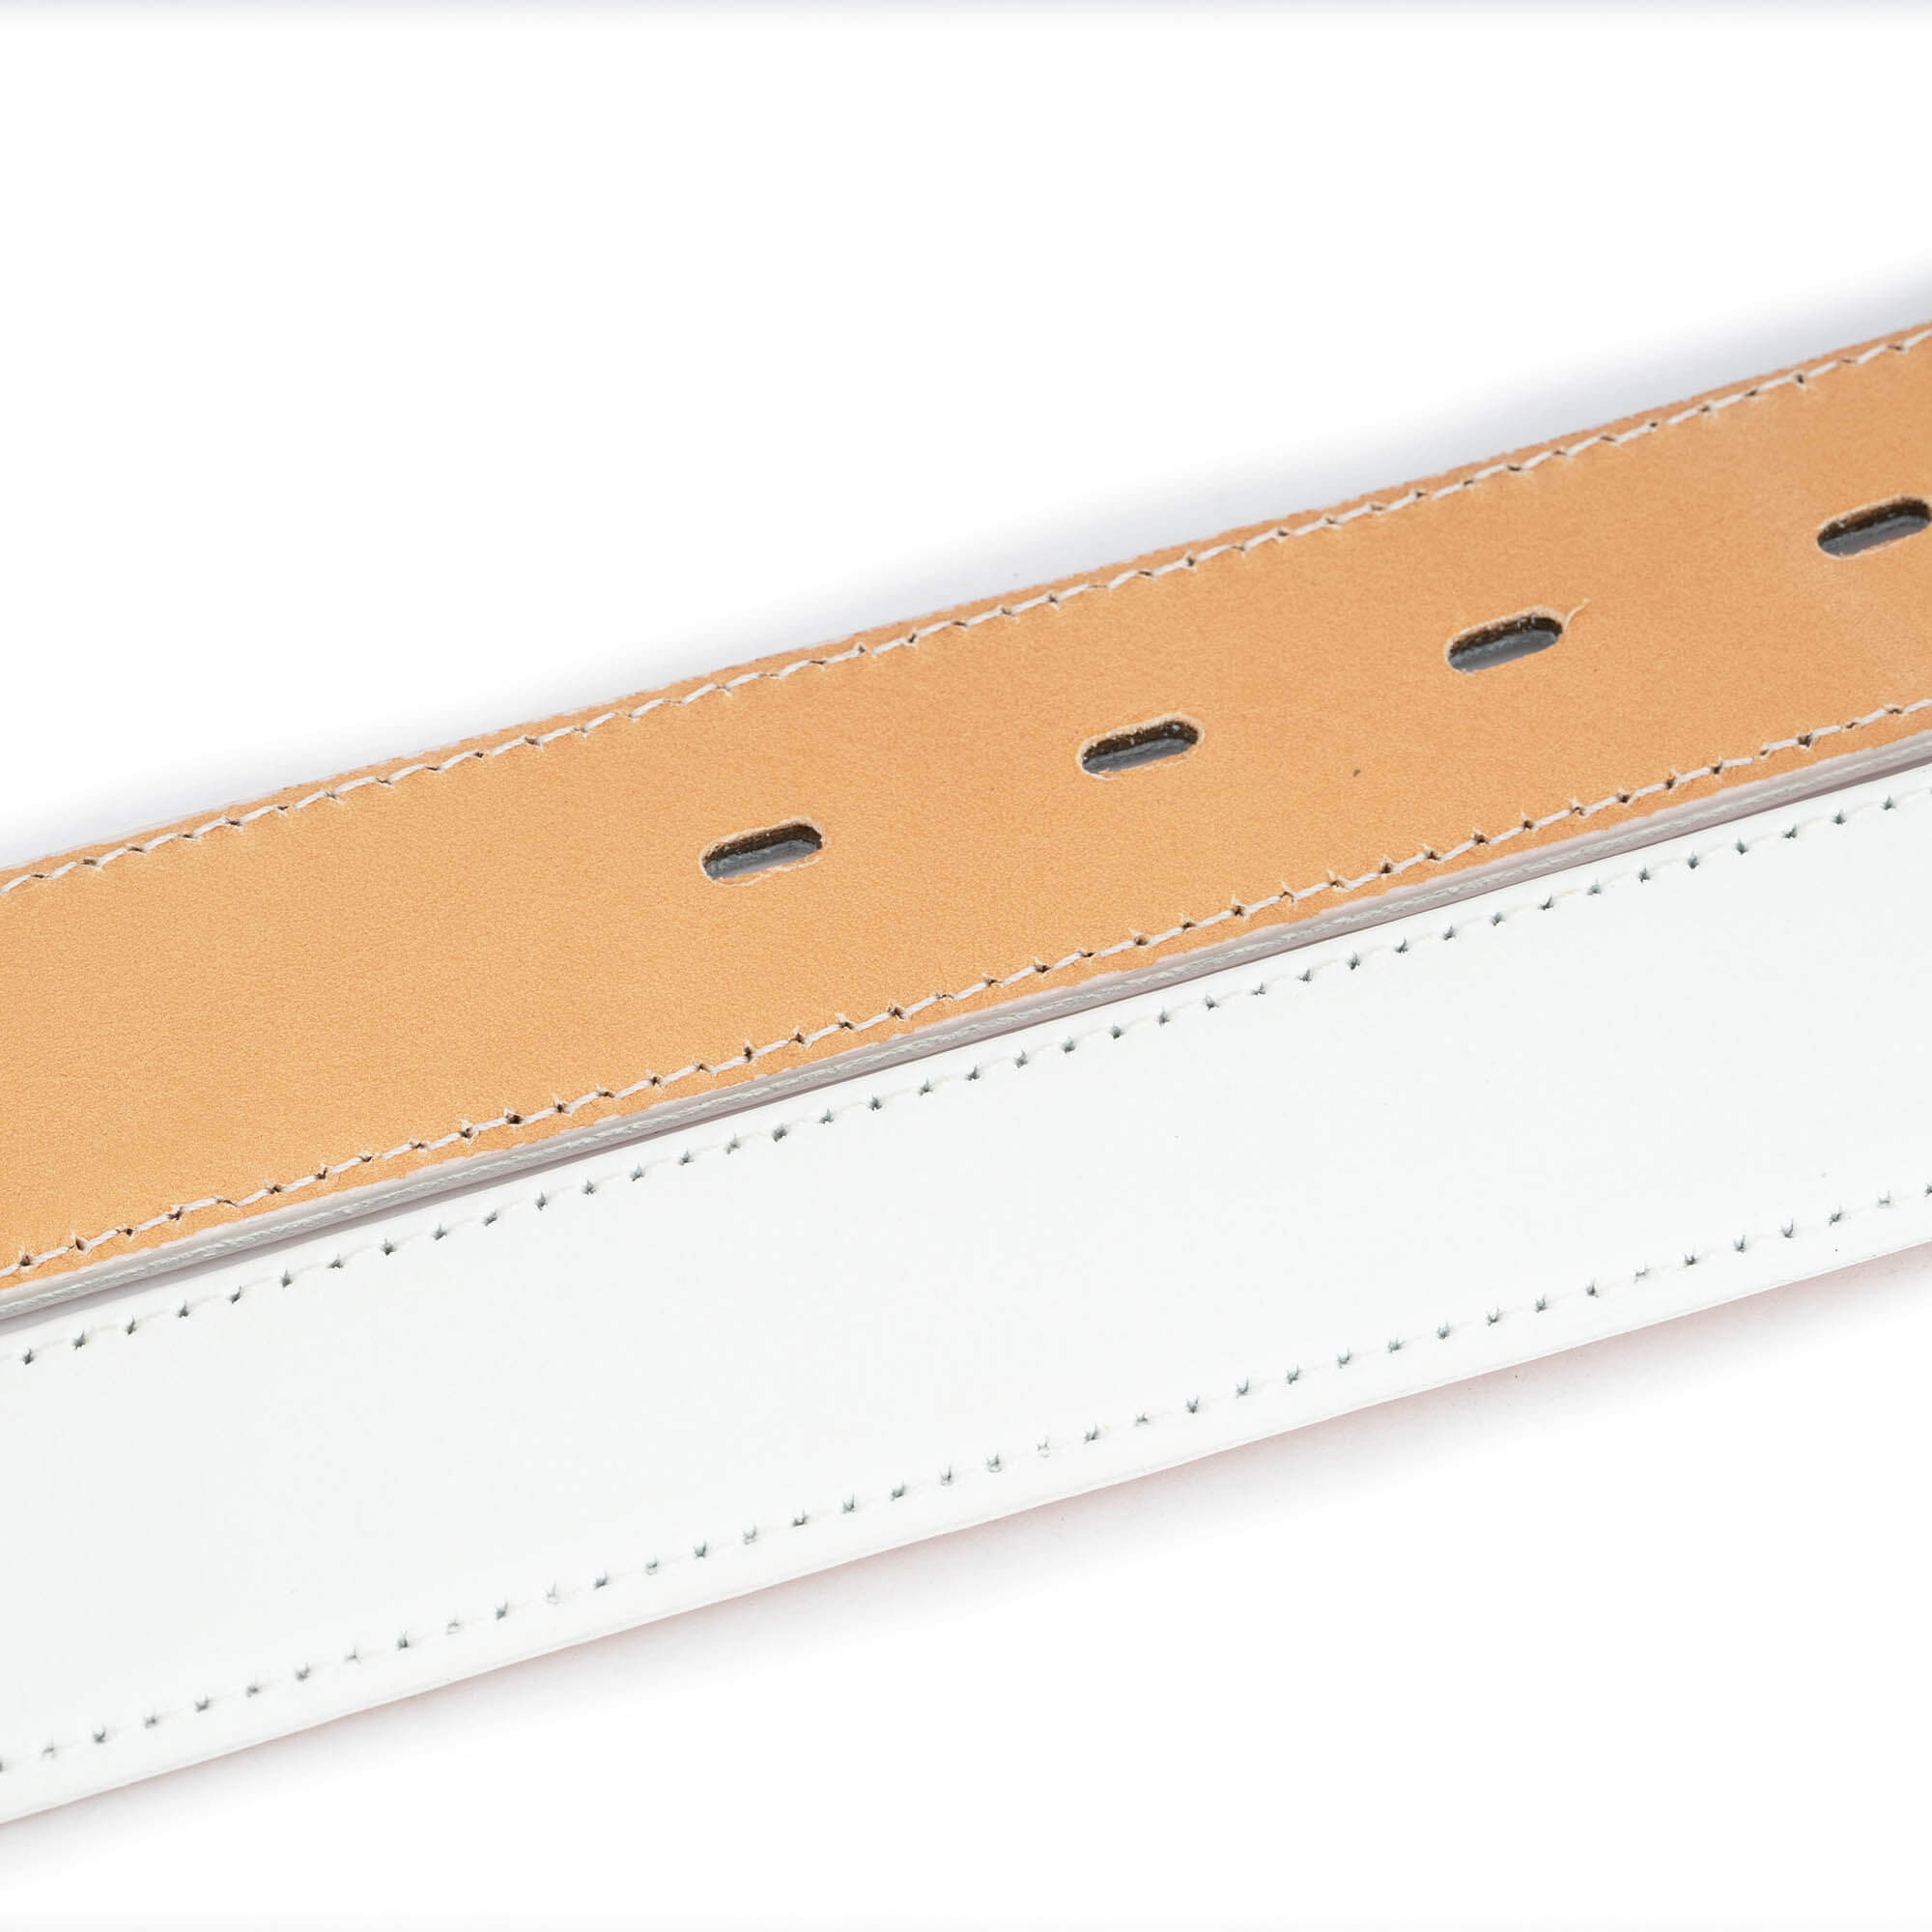 Reversible Smooth Belt Strap Replacement for LOUIS VUITTON